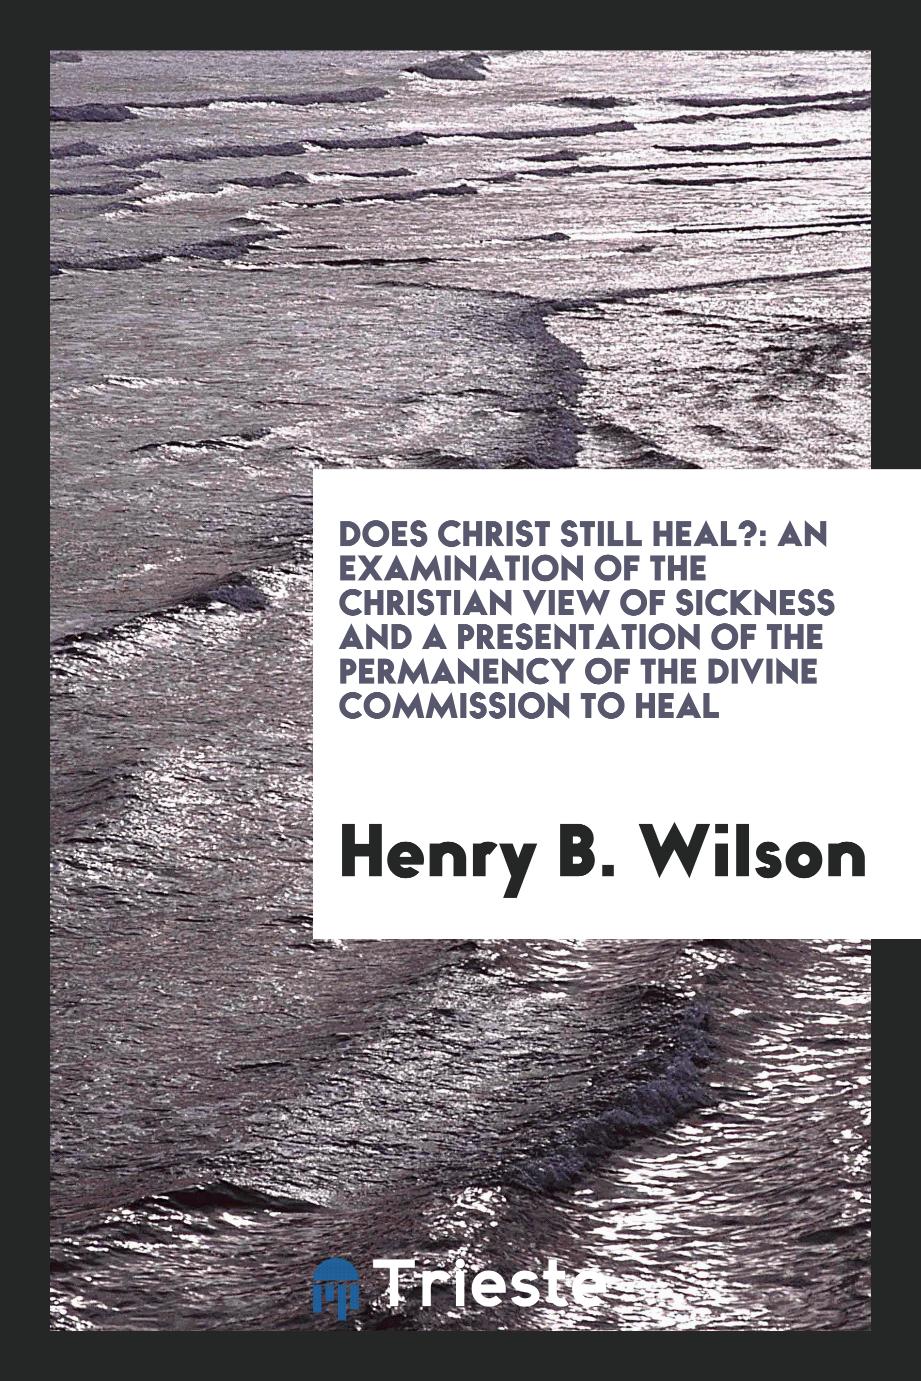 Does Christ still heal?: An Examination of the Christian view of sickness and a presentation of the permanency of the divine commission to heal